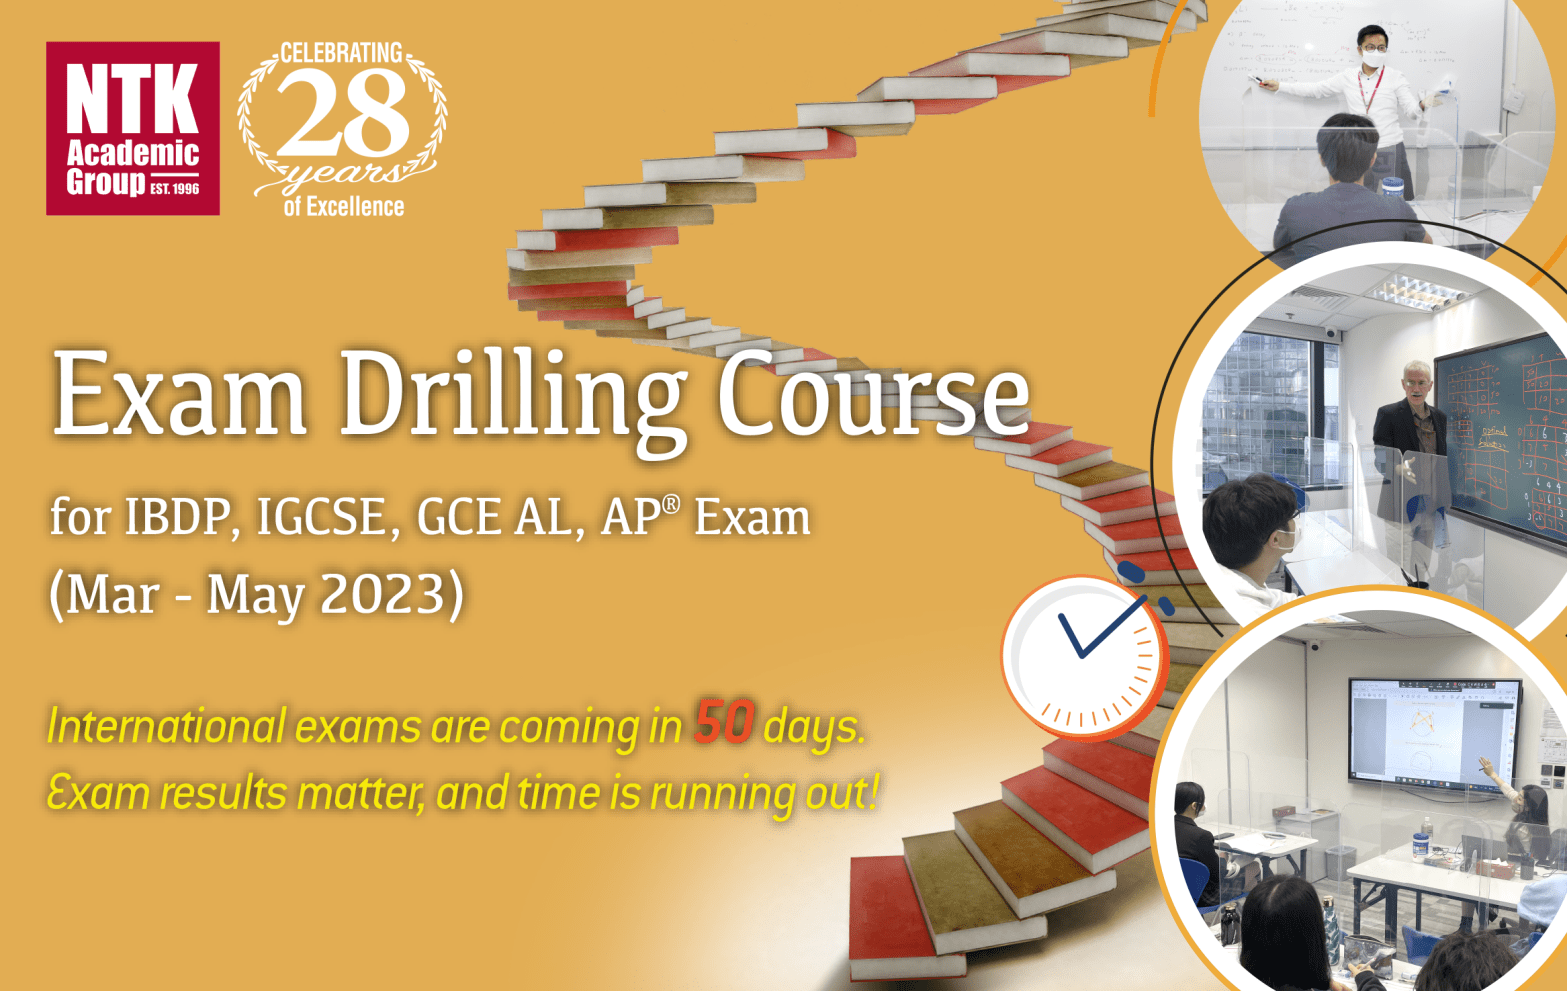 【NTK Exam Drilling Course】Enrol NOW! Boost your exam results in the final 50 days!